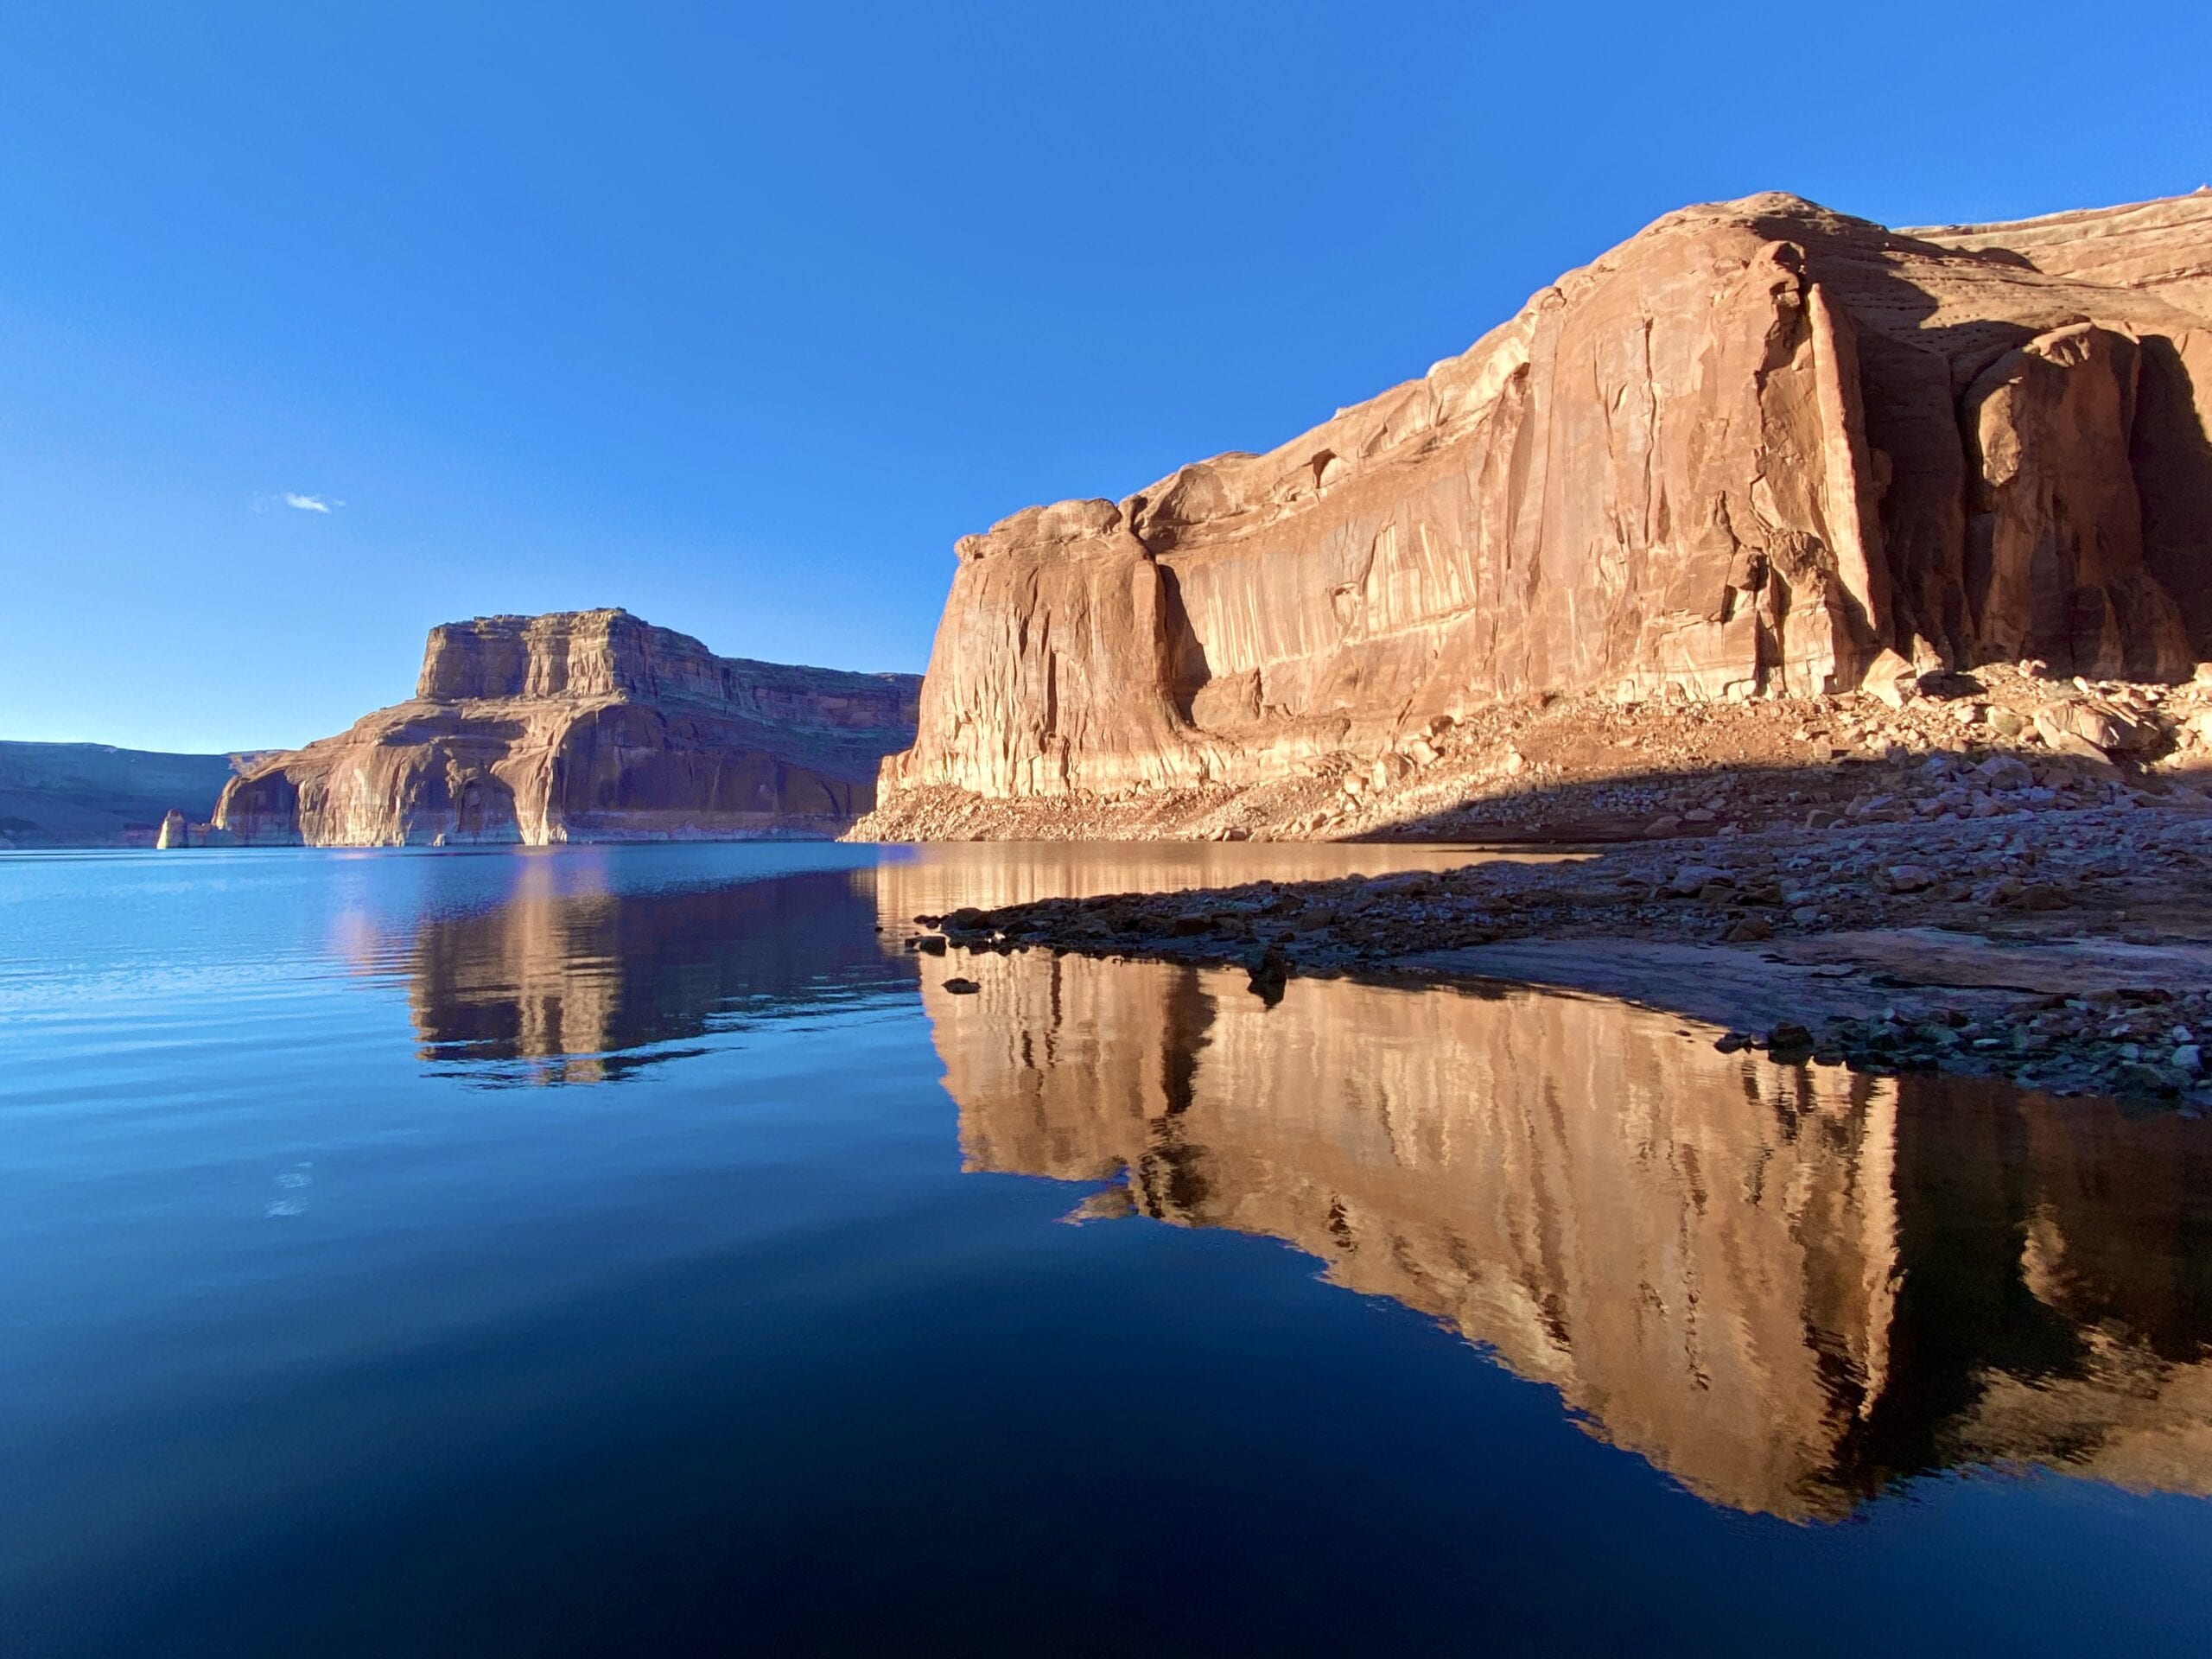 Reflections on Lake Powell traveling from Arizona to Utah by Houseboat